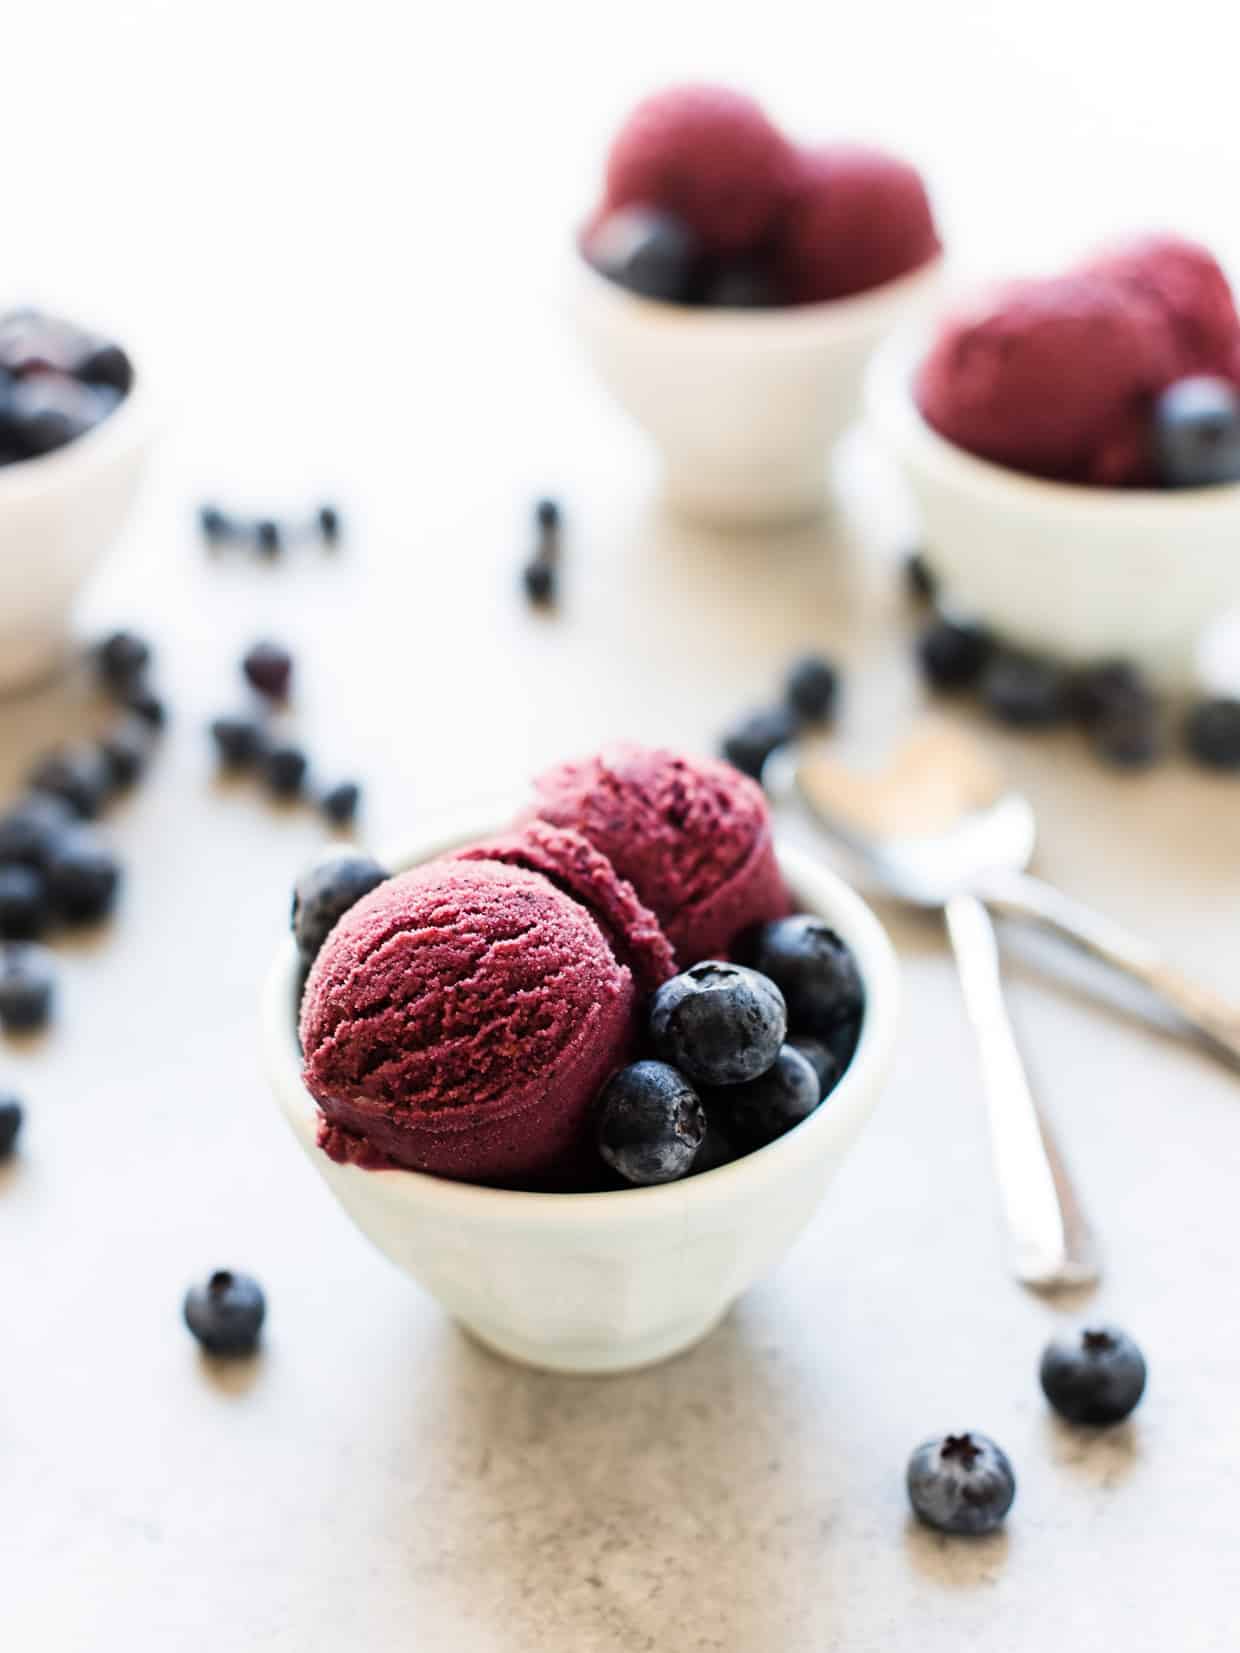 Blueberry Açaí Frozen Yogurt served in small white bowls with blueberries for garnish.